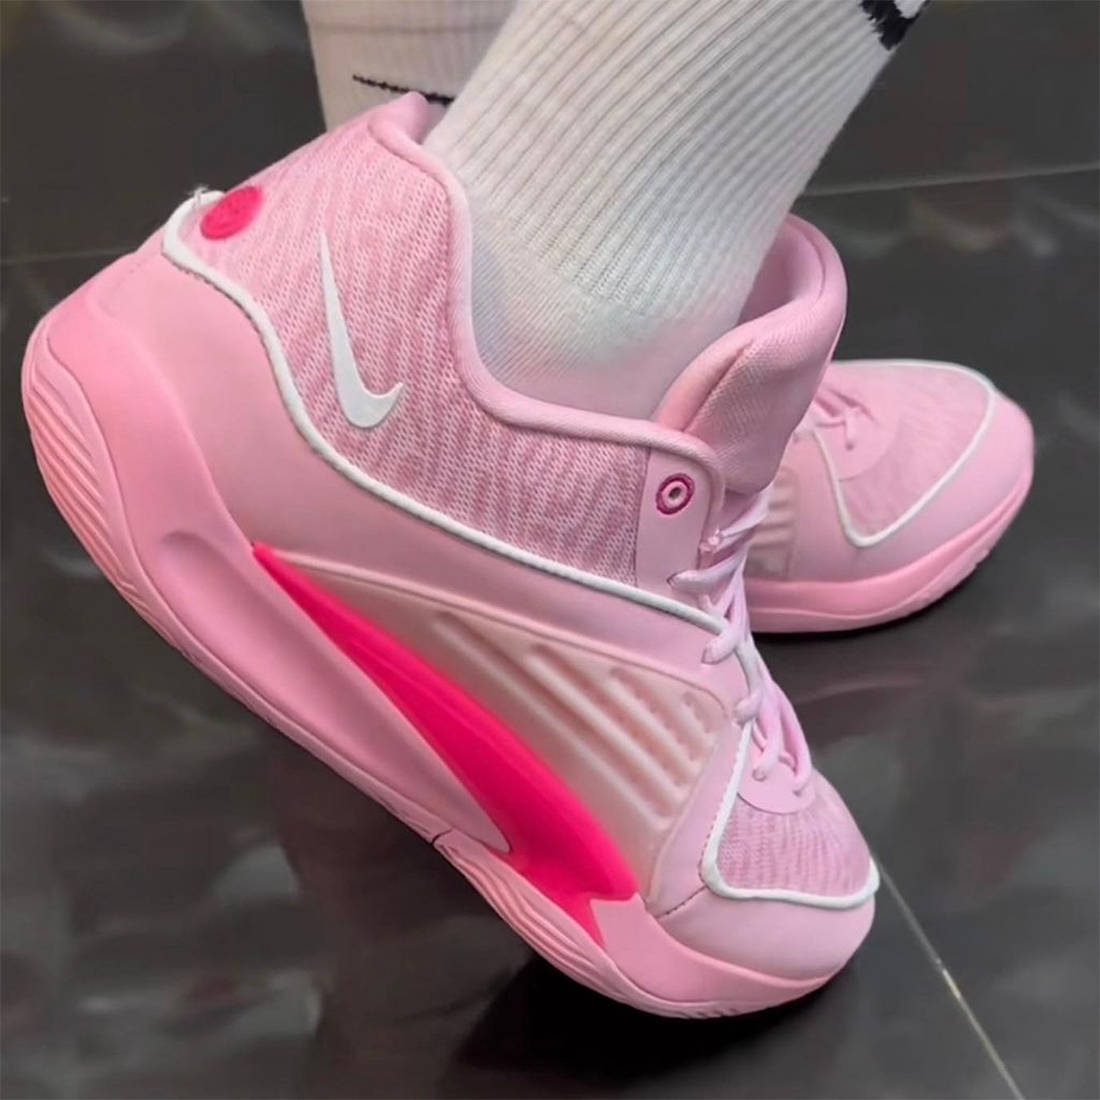 First Look at the Nike KD 16 Aunt Pearl